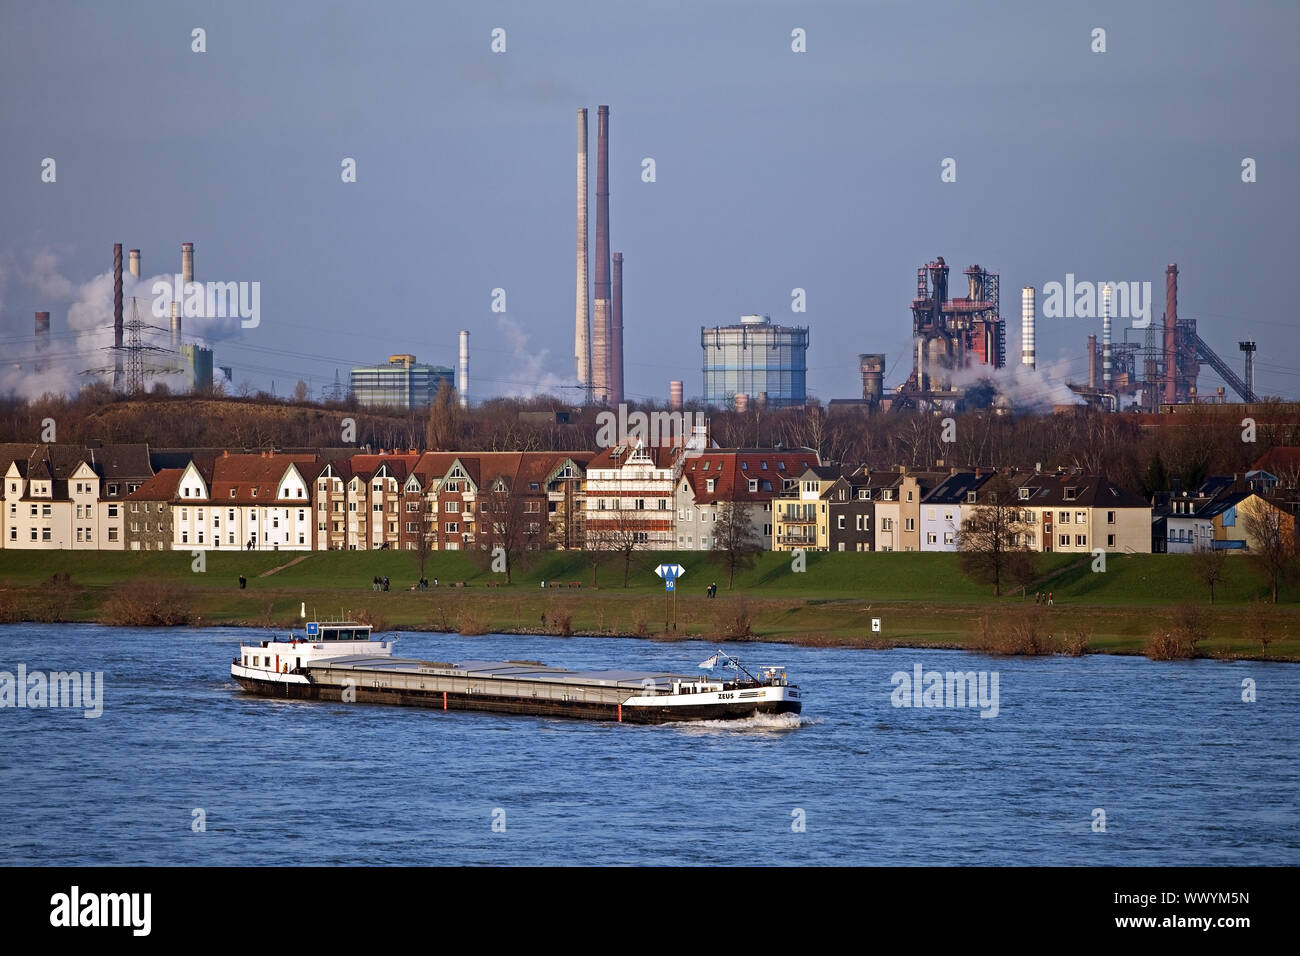 cargo ship on river Rhine and industrial scenery in background, Duisburg, Germany, Europe Stock Photo